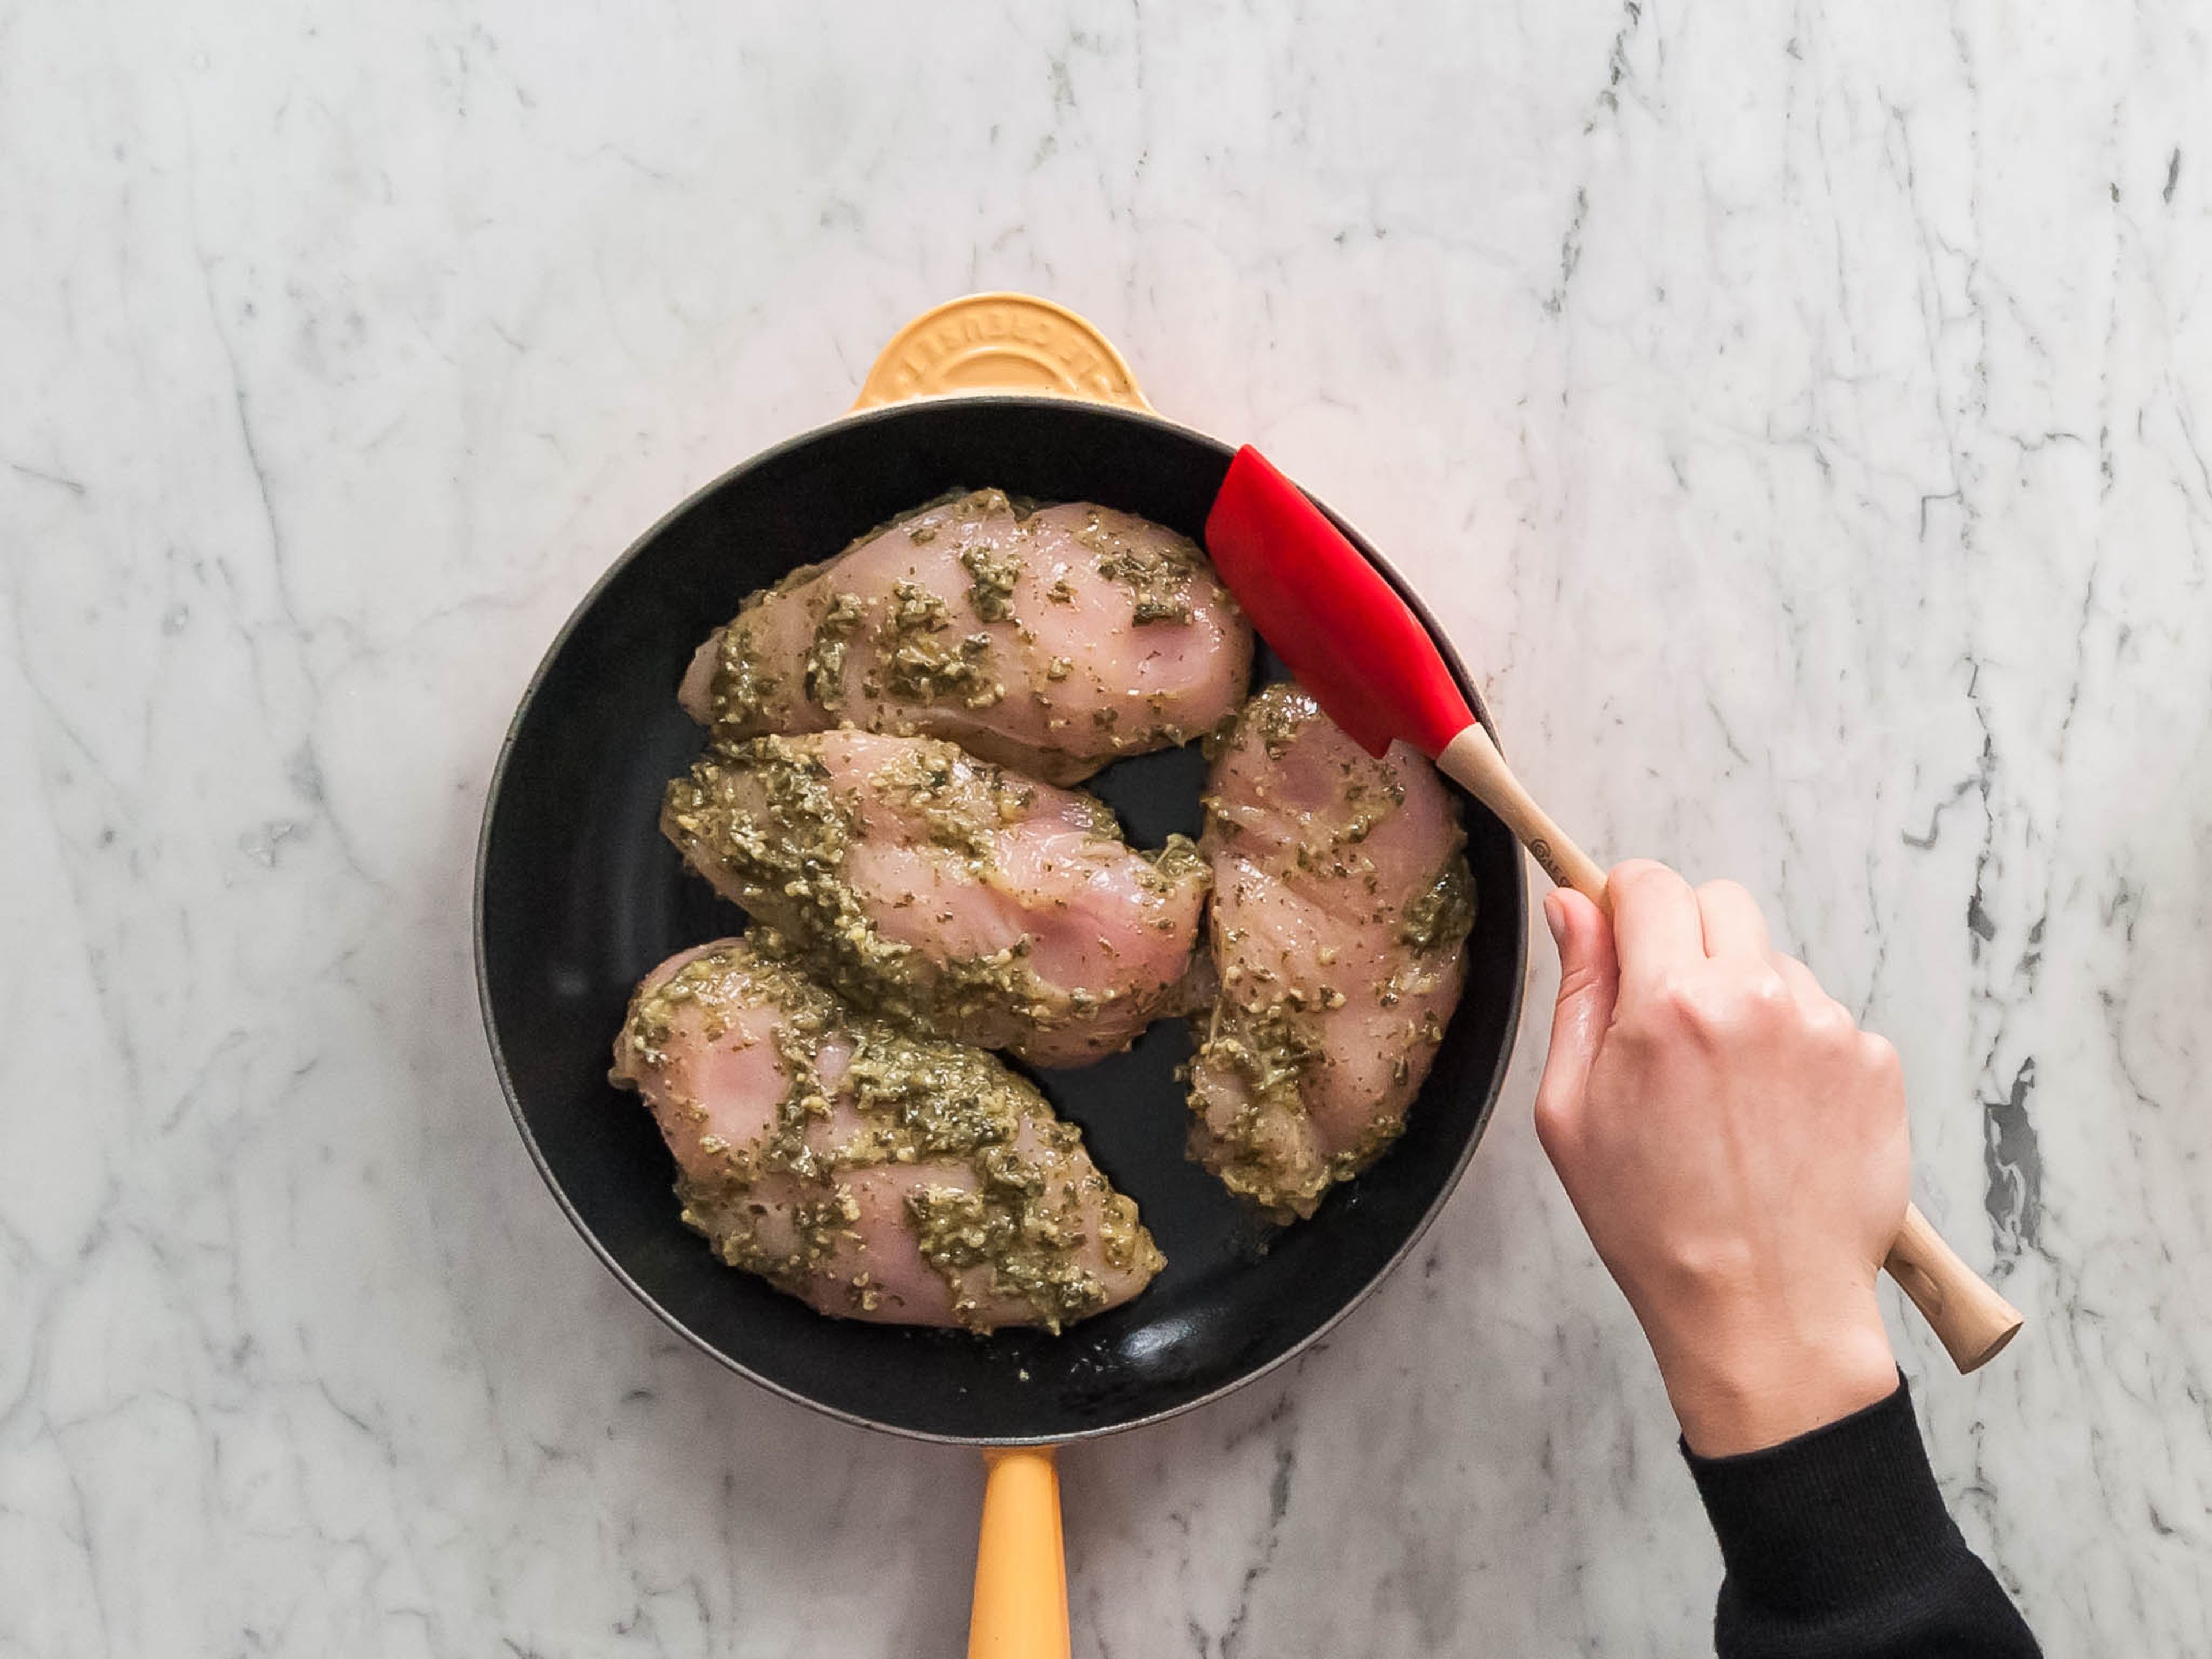 Place chicken in large ovenproof frying pan or on baking sheet lined with heavy-duty foil.